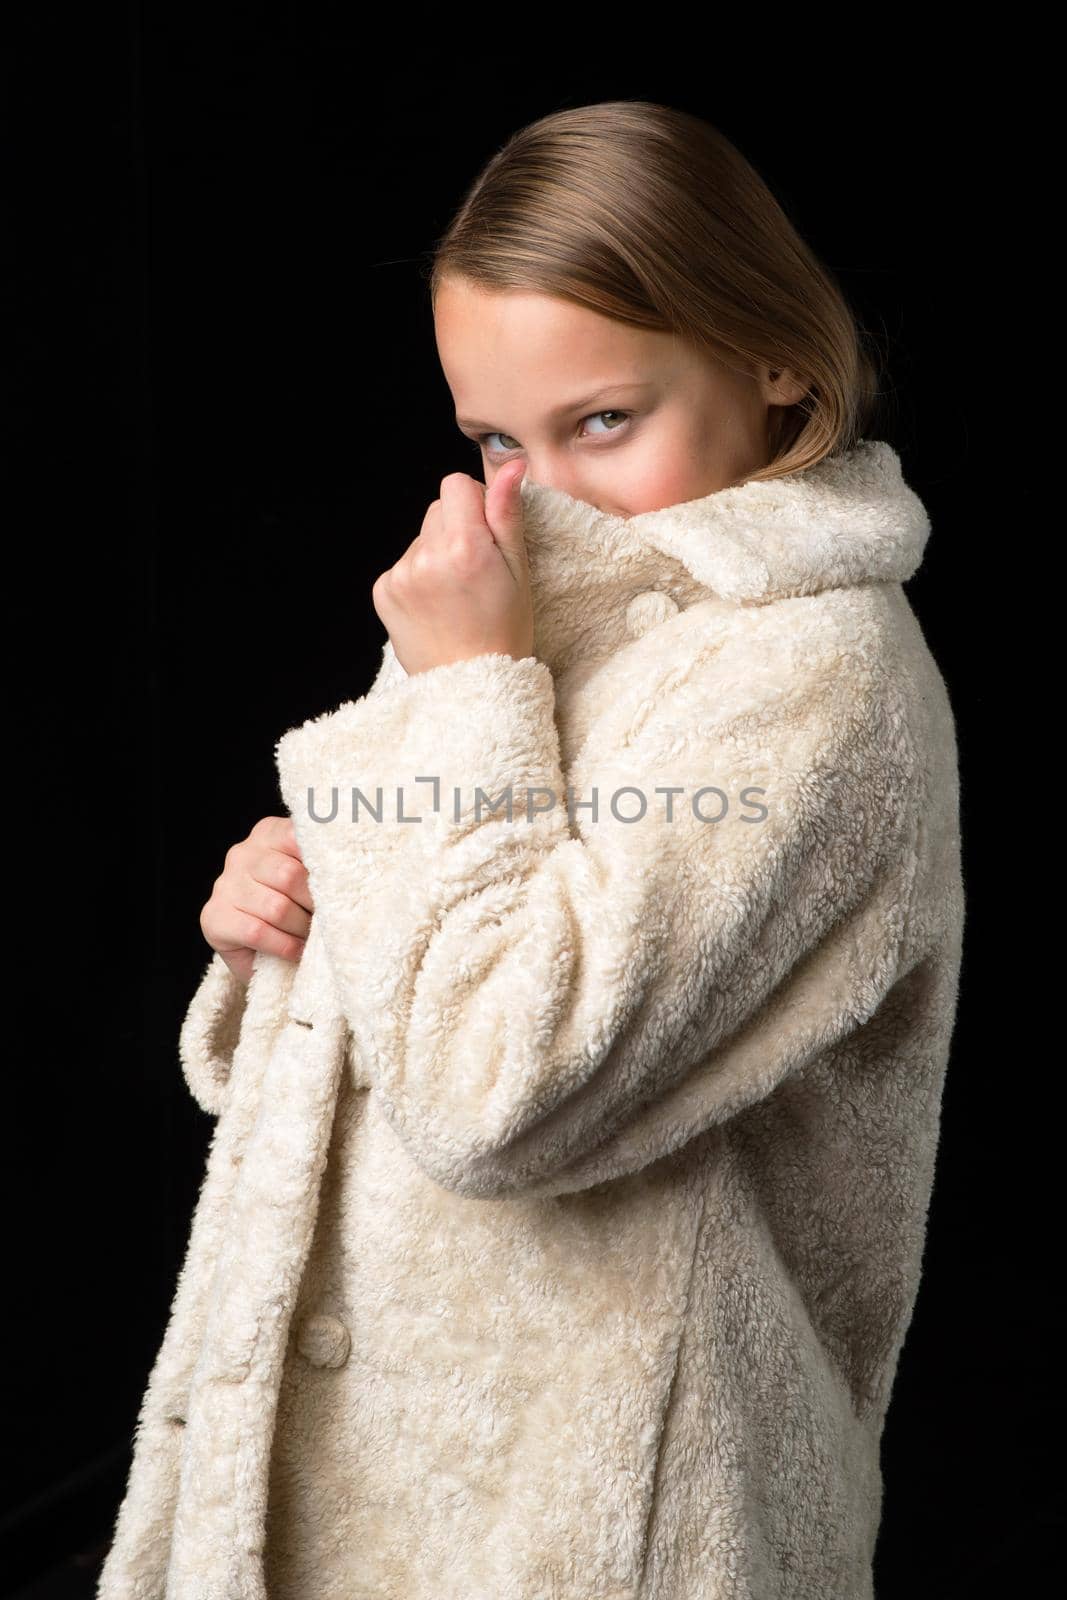 Stylish preteen girl in faux fur coat. Pretty fashionable blonde girl dressed winter coat posing against black background. Close up portrait of fashionable child dressed fashion outwear